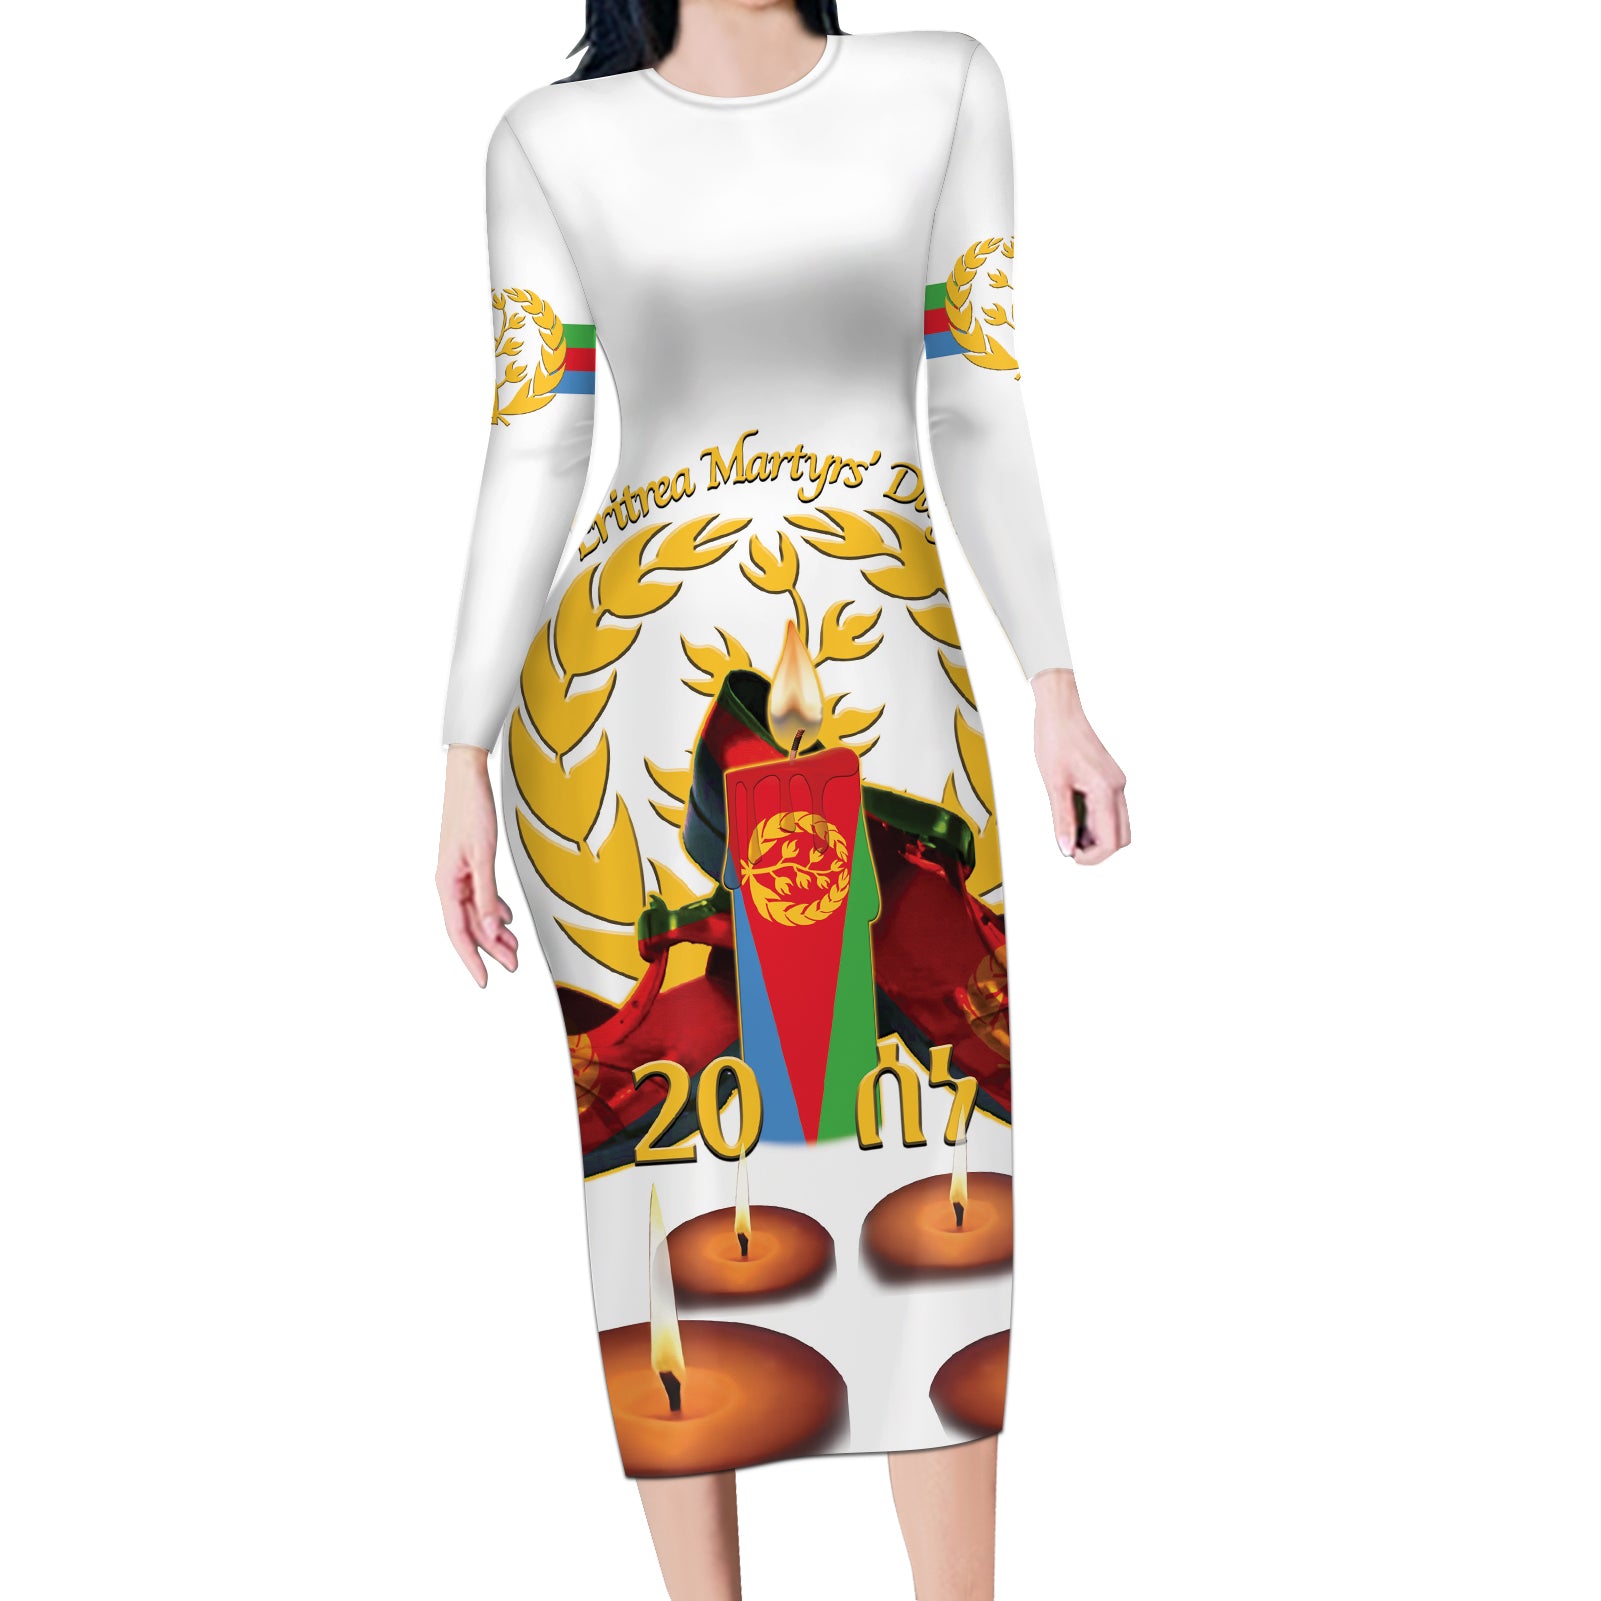 Custom Eritrea Martyrs' Day Long Sleeve Bodycon Dress 20 June Shida Shoes With Candles - White